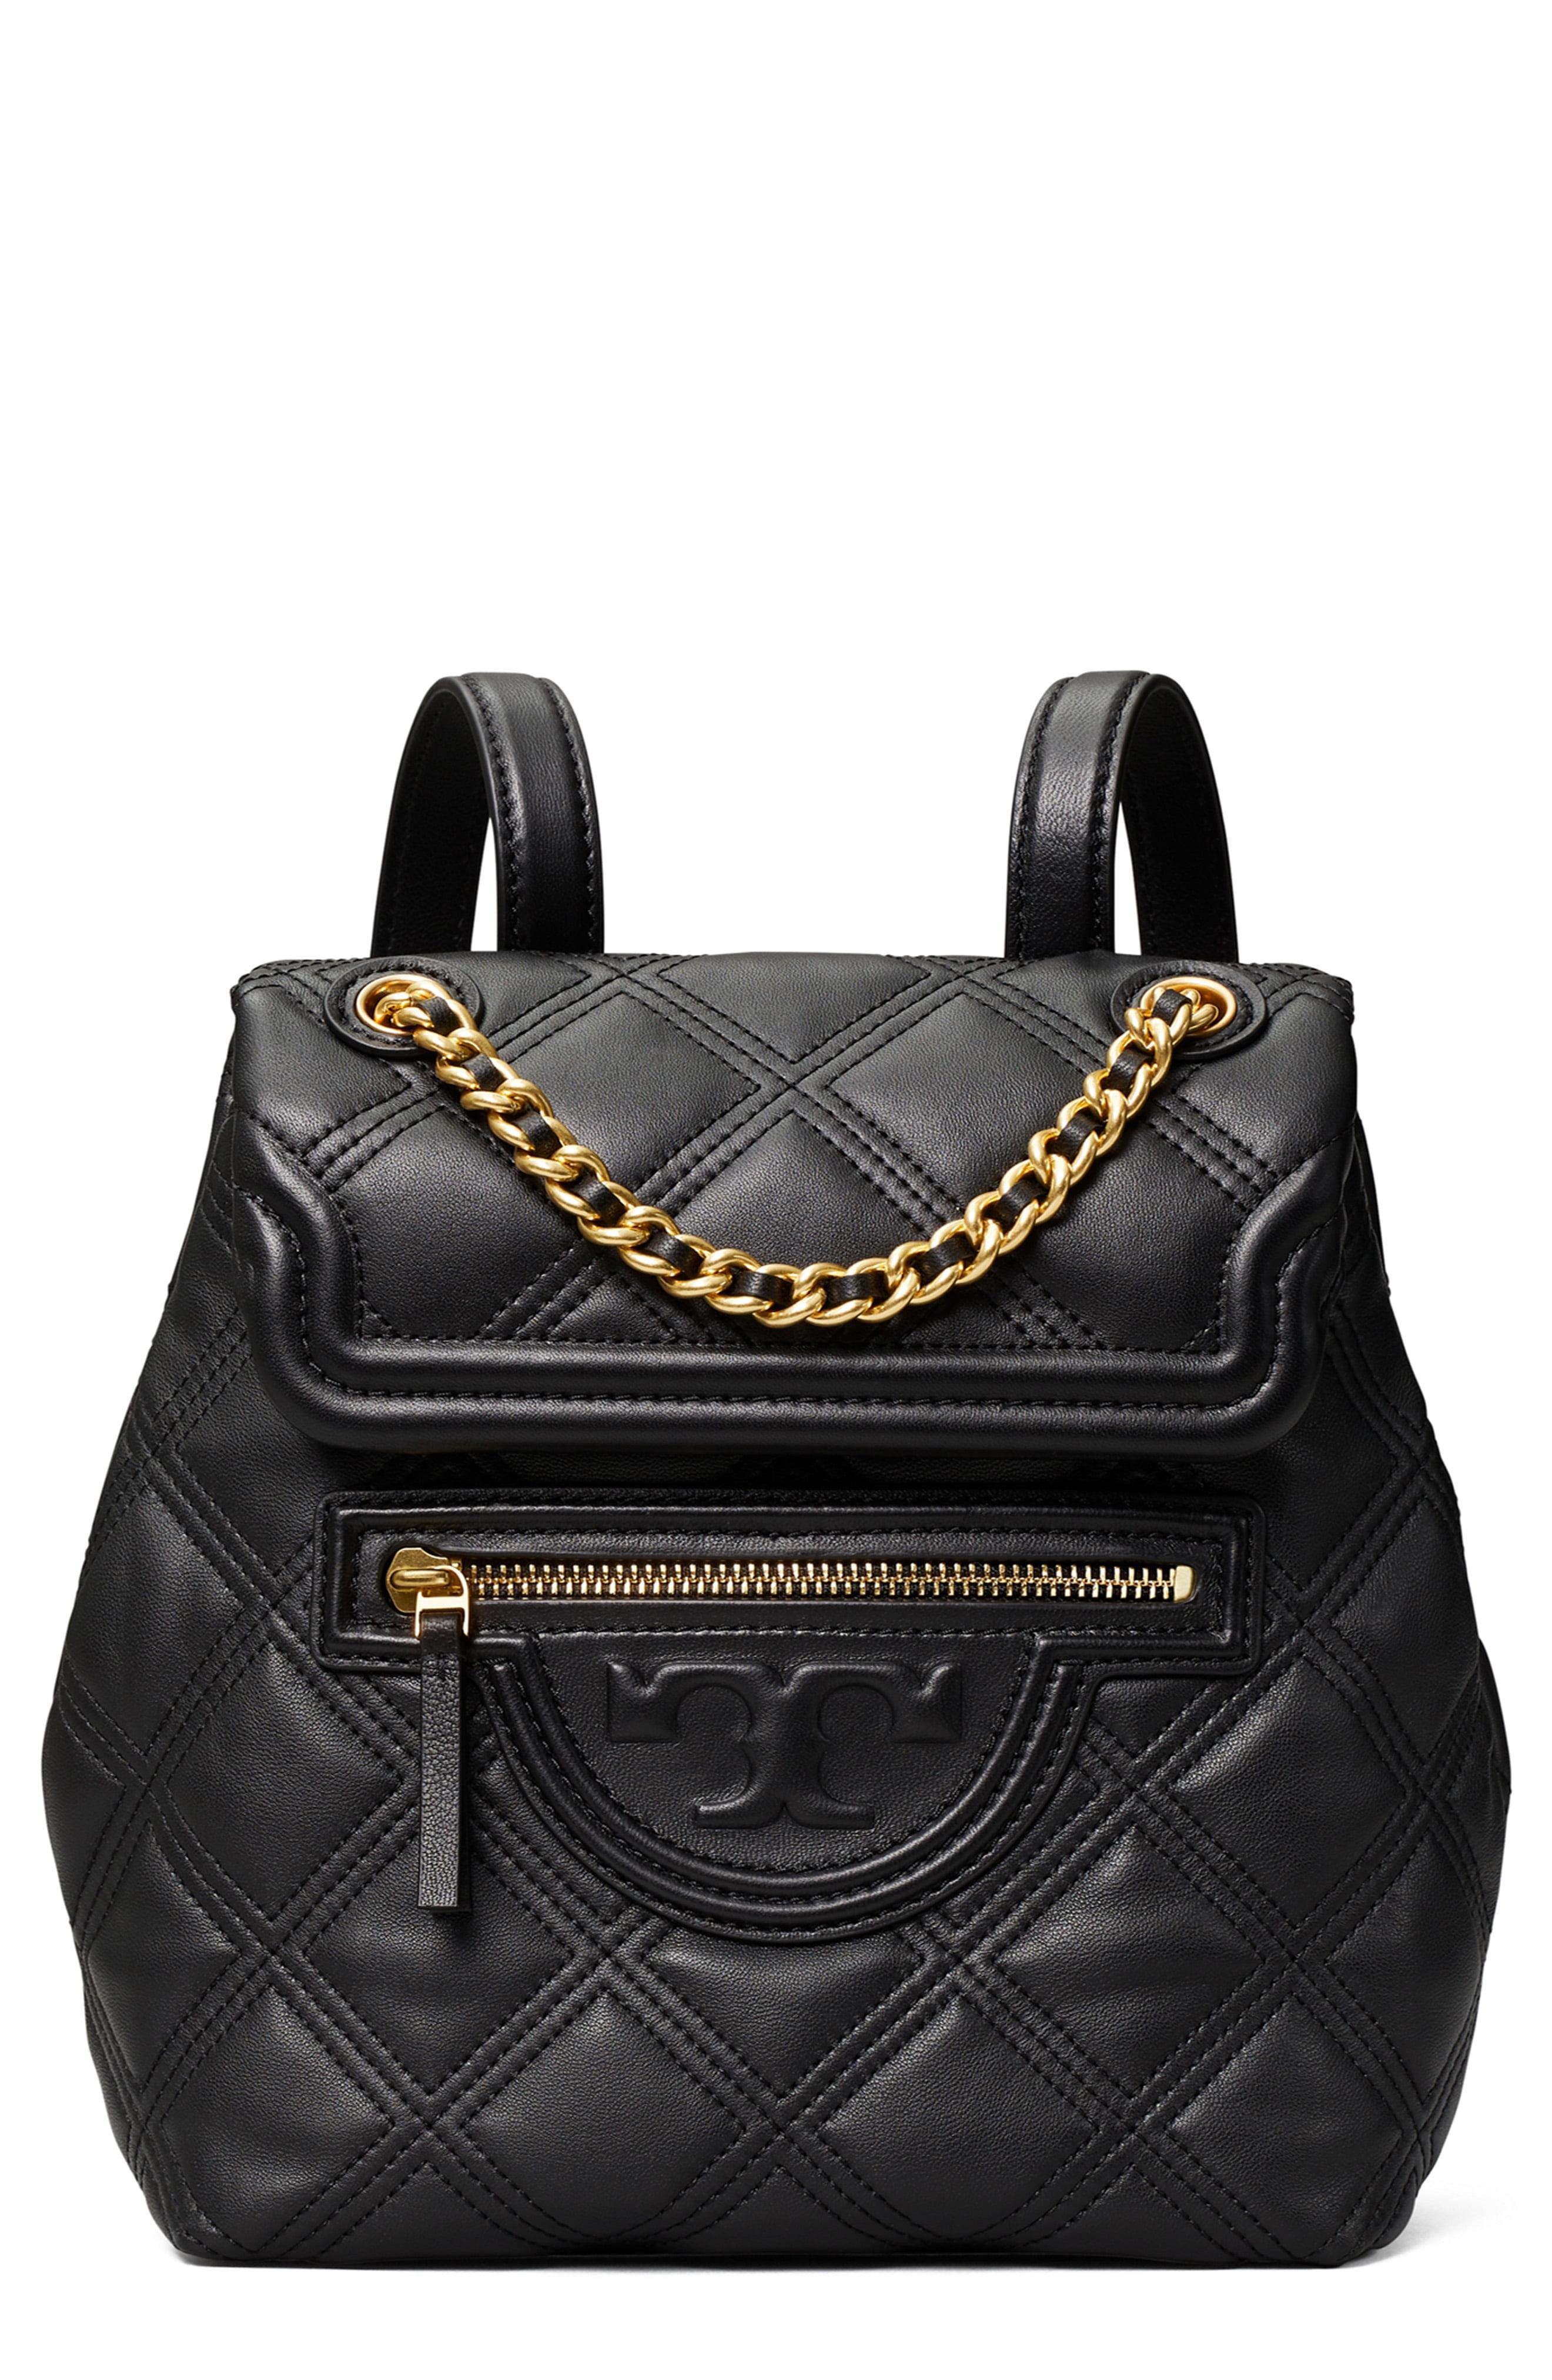 Tory Burch Leather Fleming Soft Mini Backpack in Black - Save 23% - Lyst